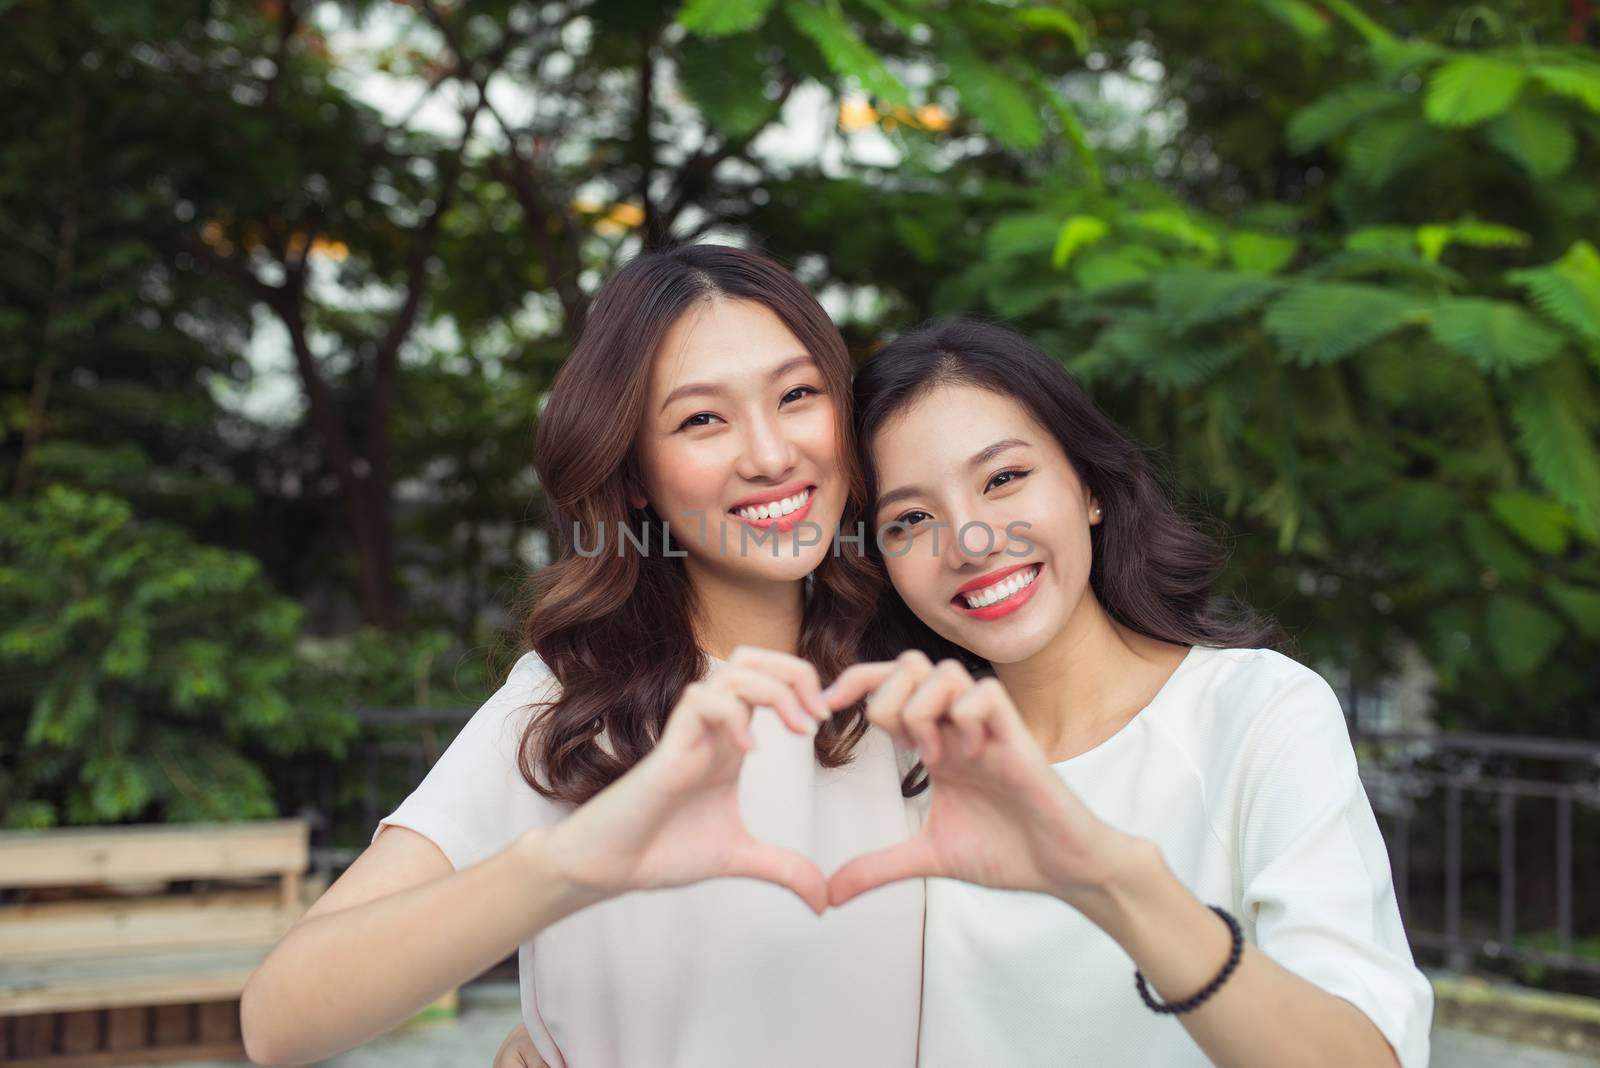 Woman couple having fun outdoors and making heart symbol